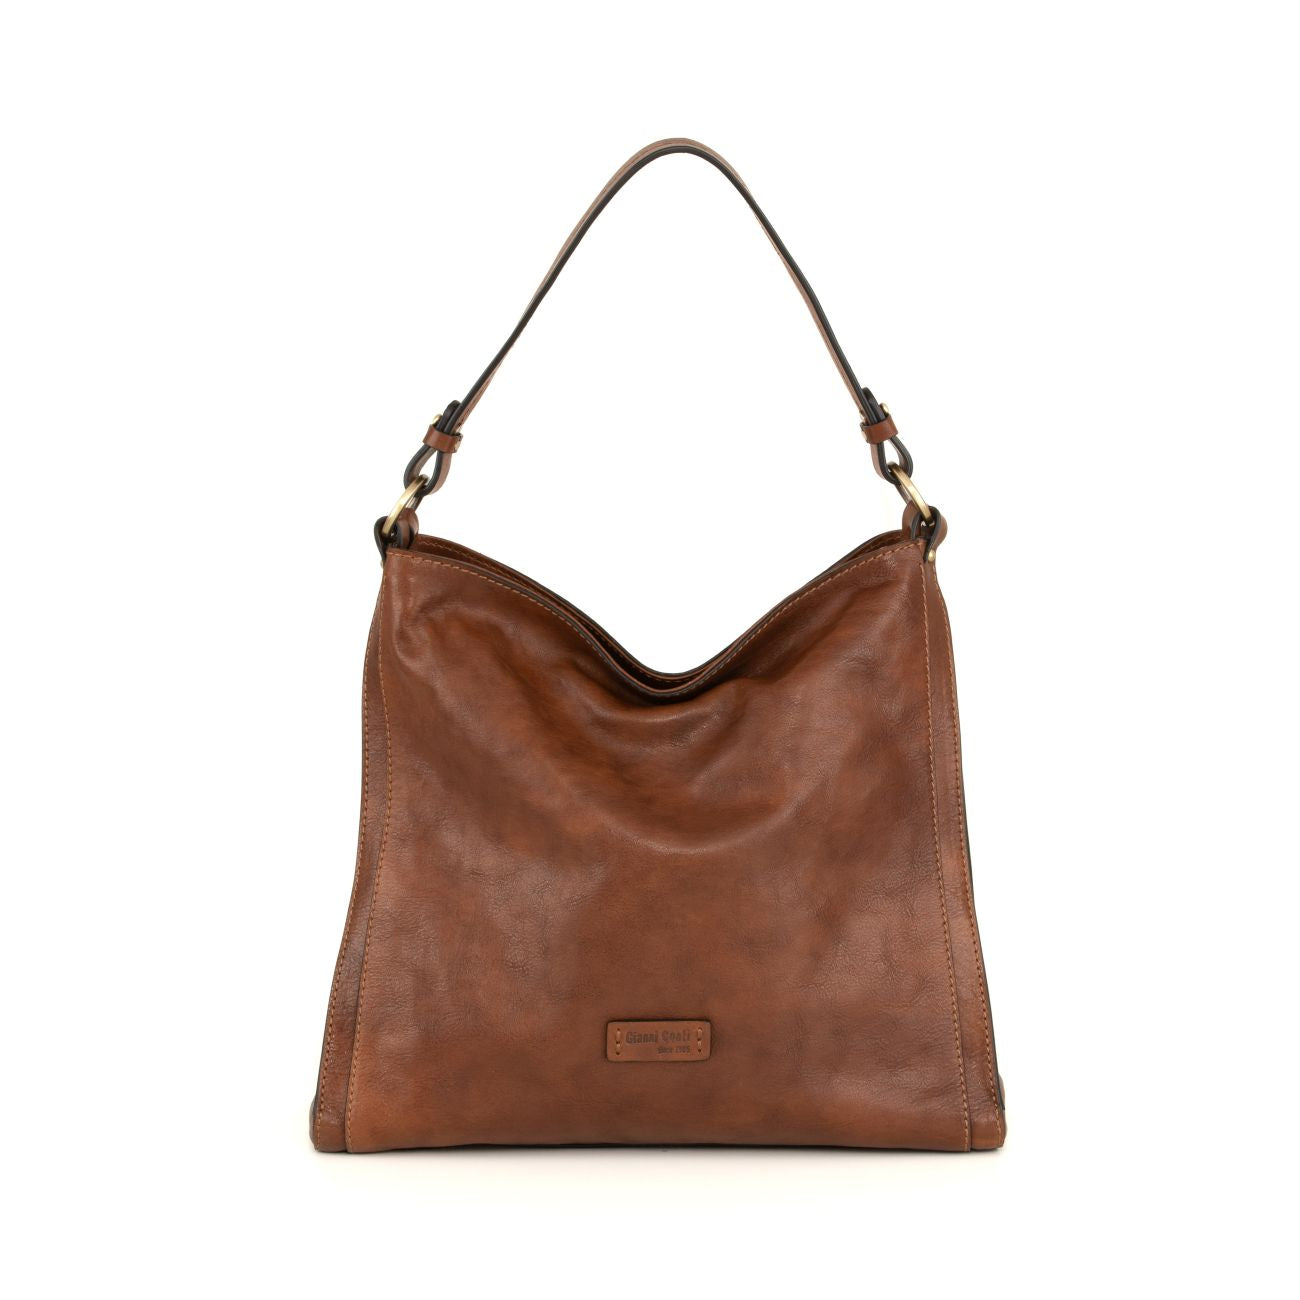 FLAMINIA Vegetable-Tanned Leather Shoulder Bag by Gianni Conti